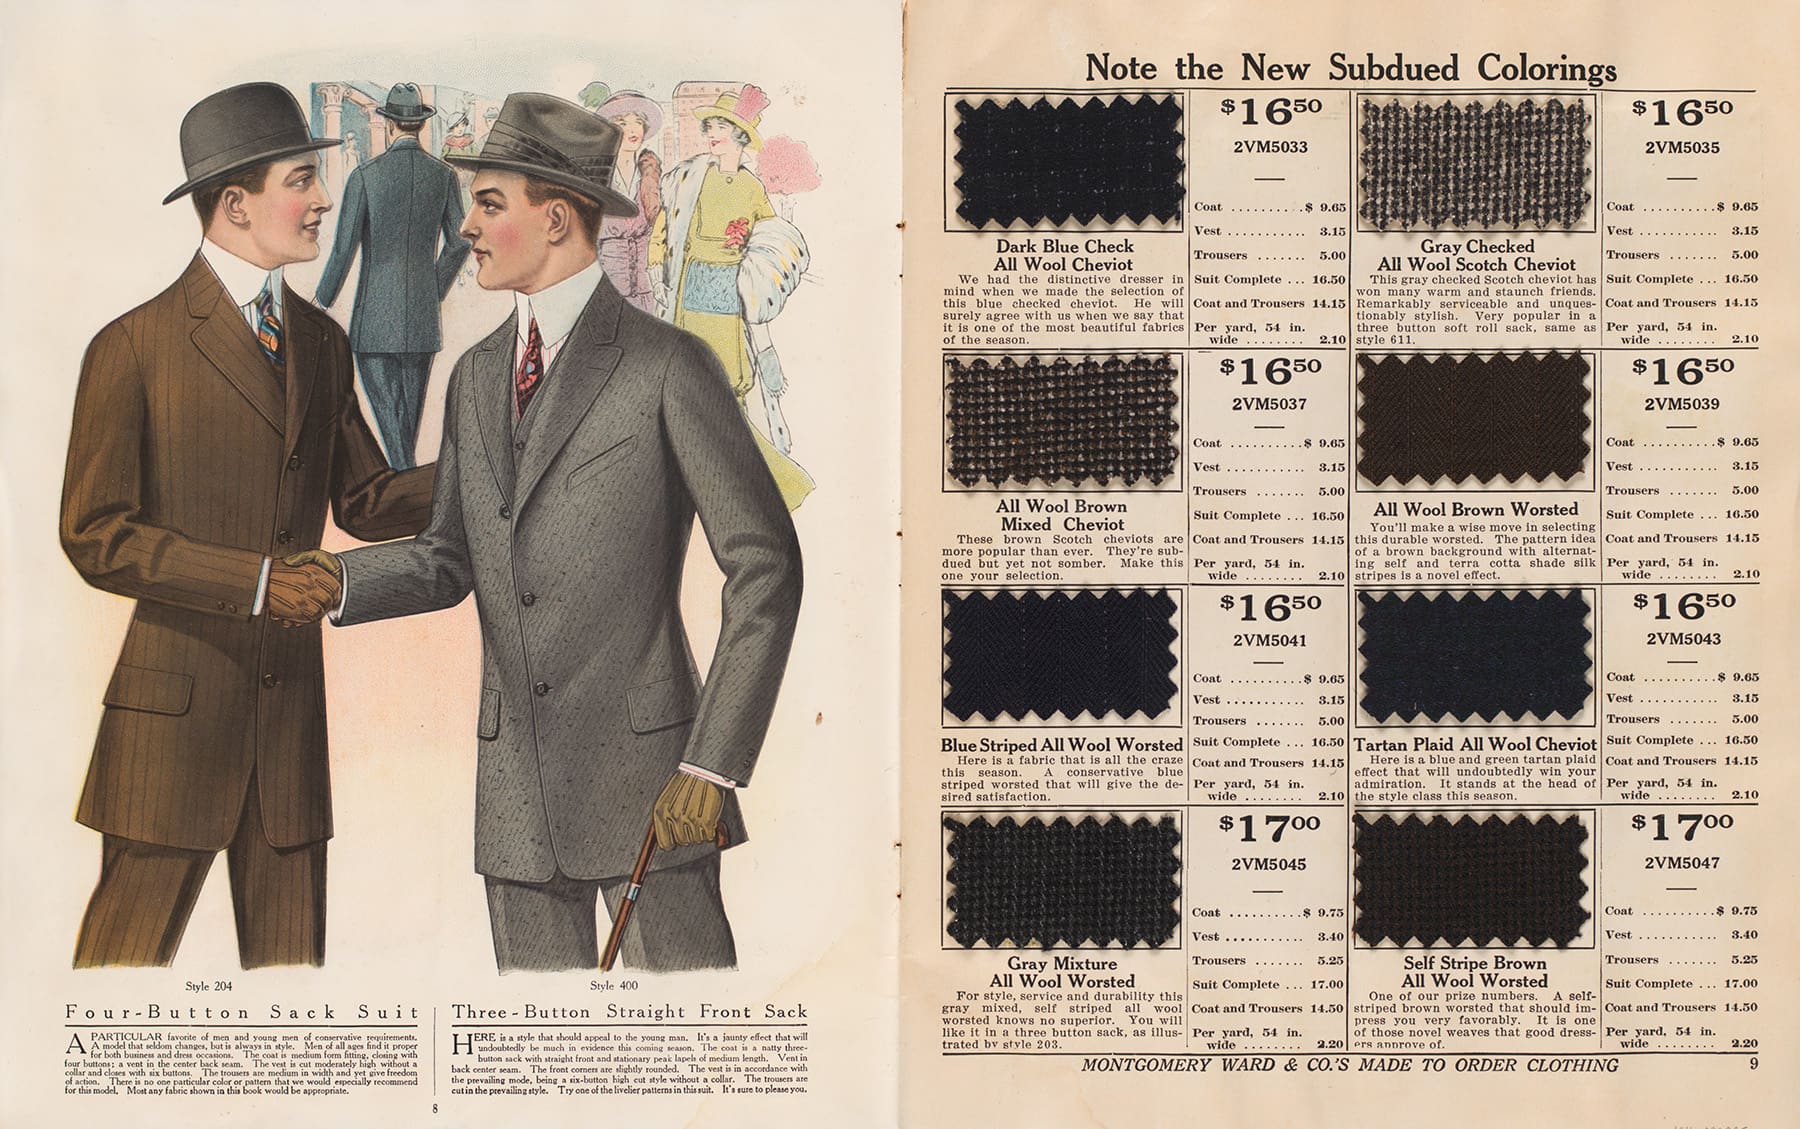 Men’s clothing from 1914 